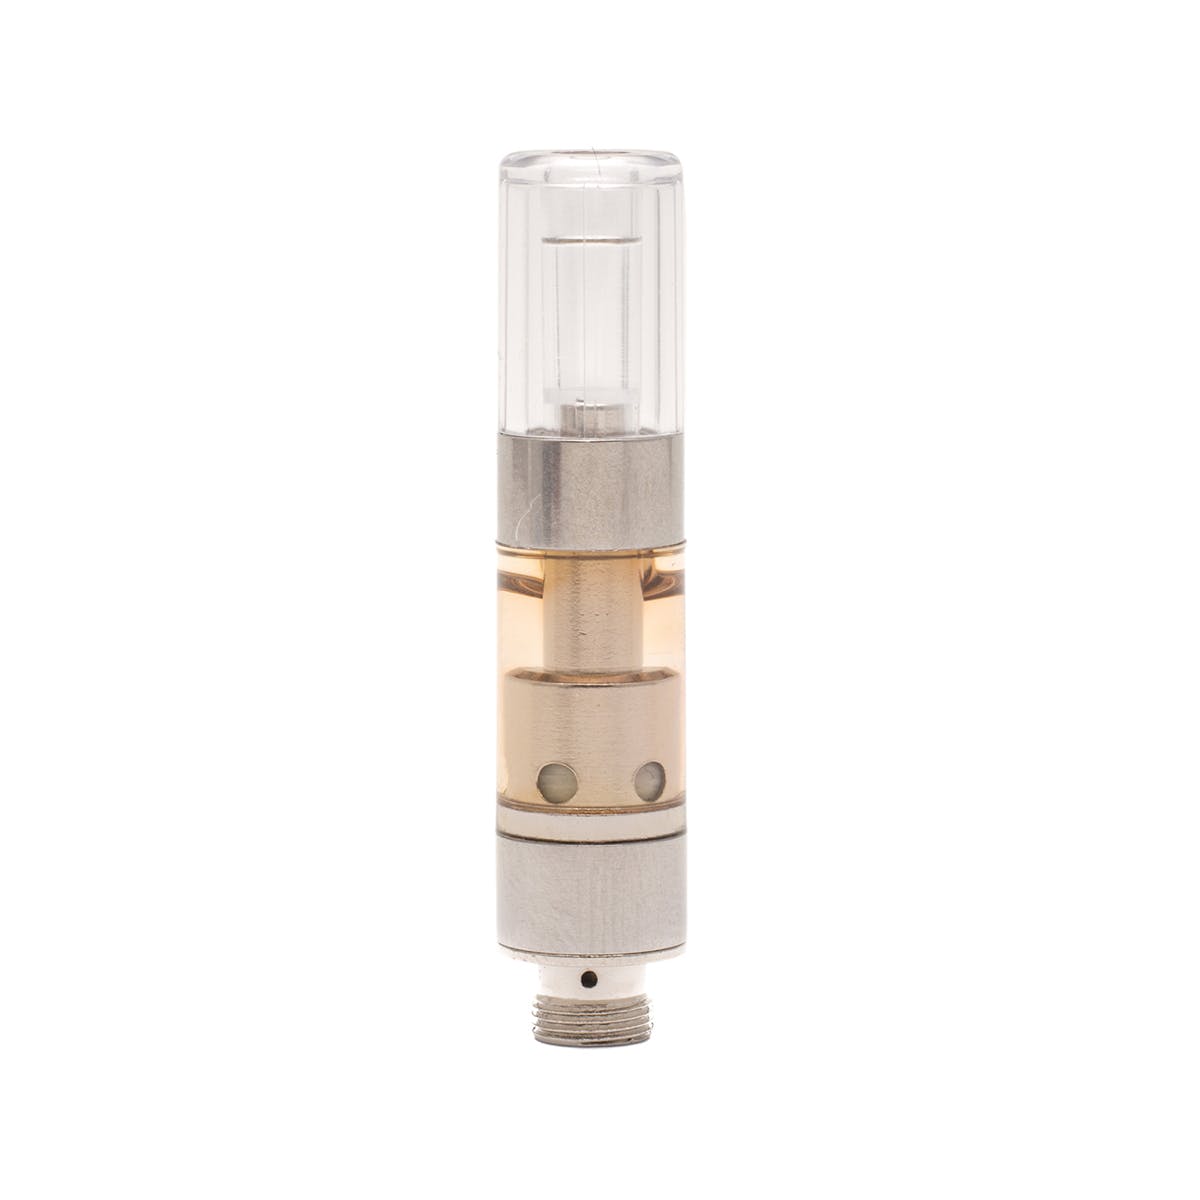 concentrate-the-cure-company-og-wedding-cake-distillate-cartridge